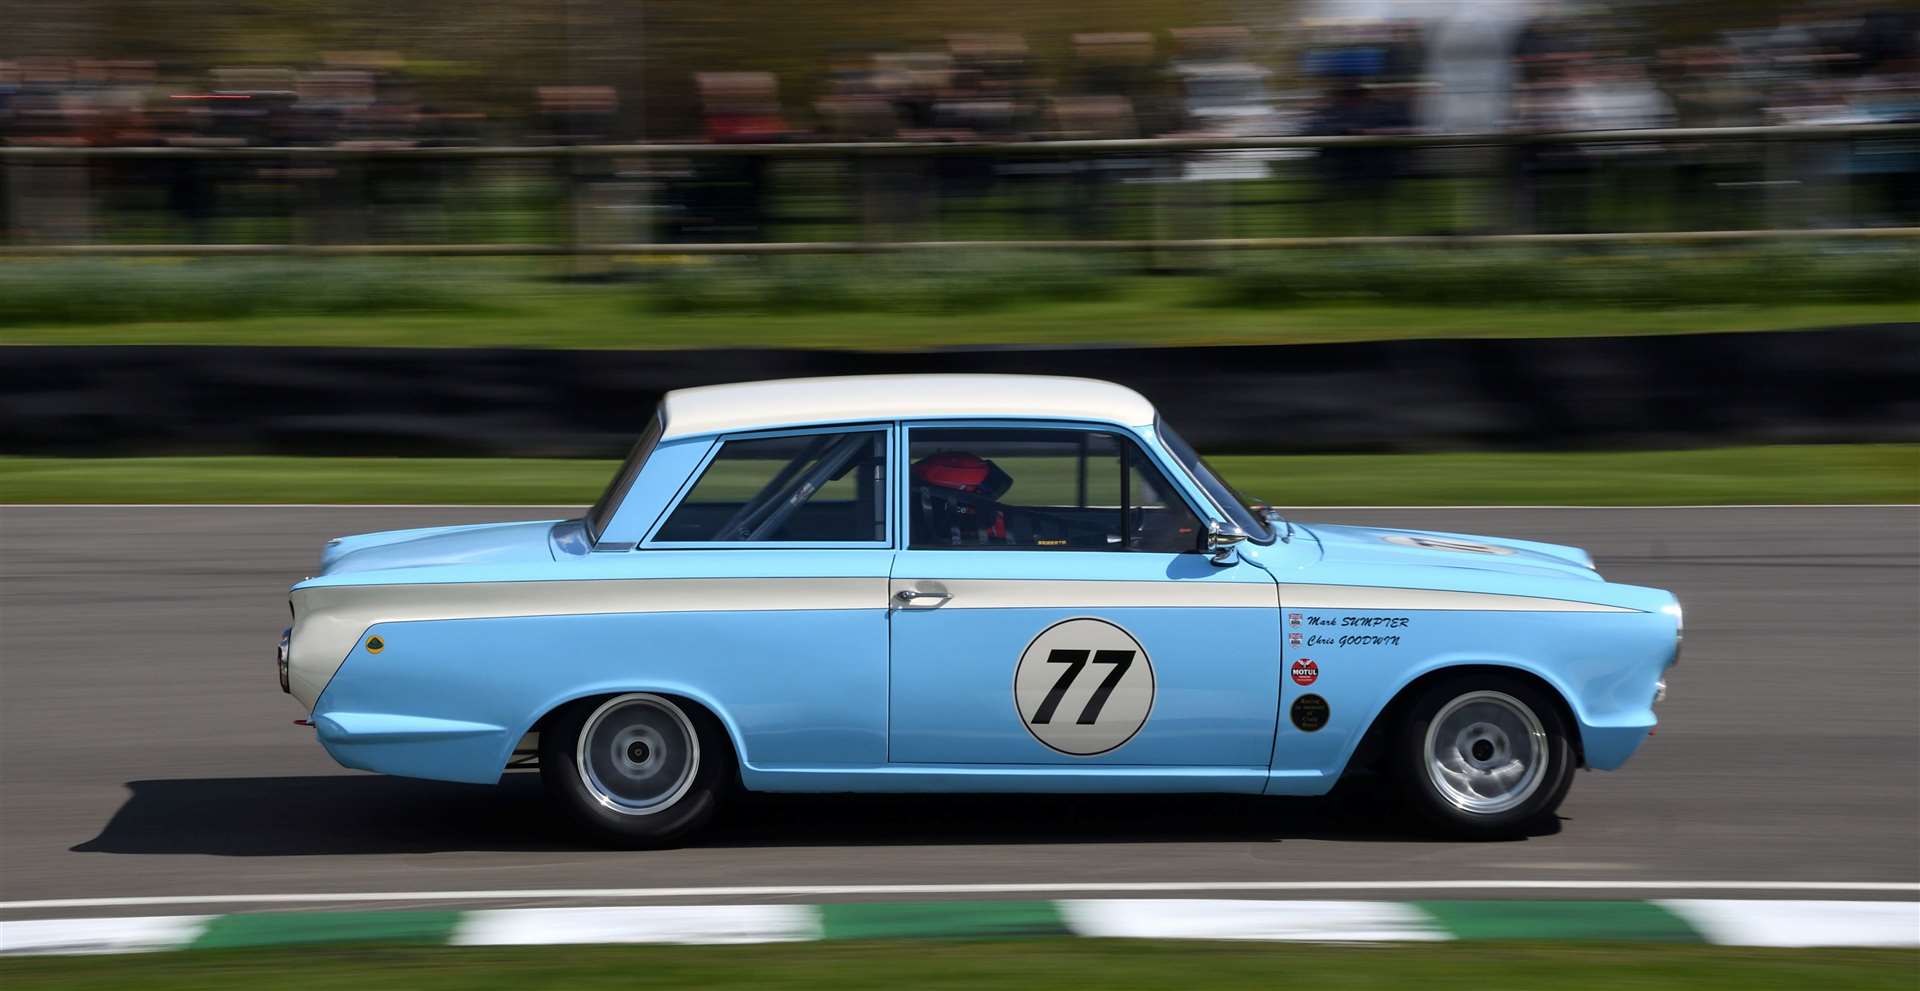 Sevenoaks racer Chris Goodwin shared a Lotus Cortina with Mark Sumpter in the Jim Clark Trophy race, finishing 11th. Picture: Simon Hildrew